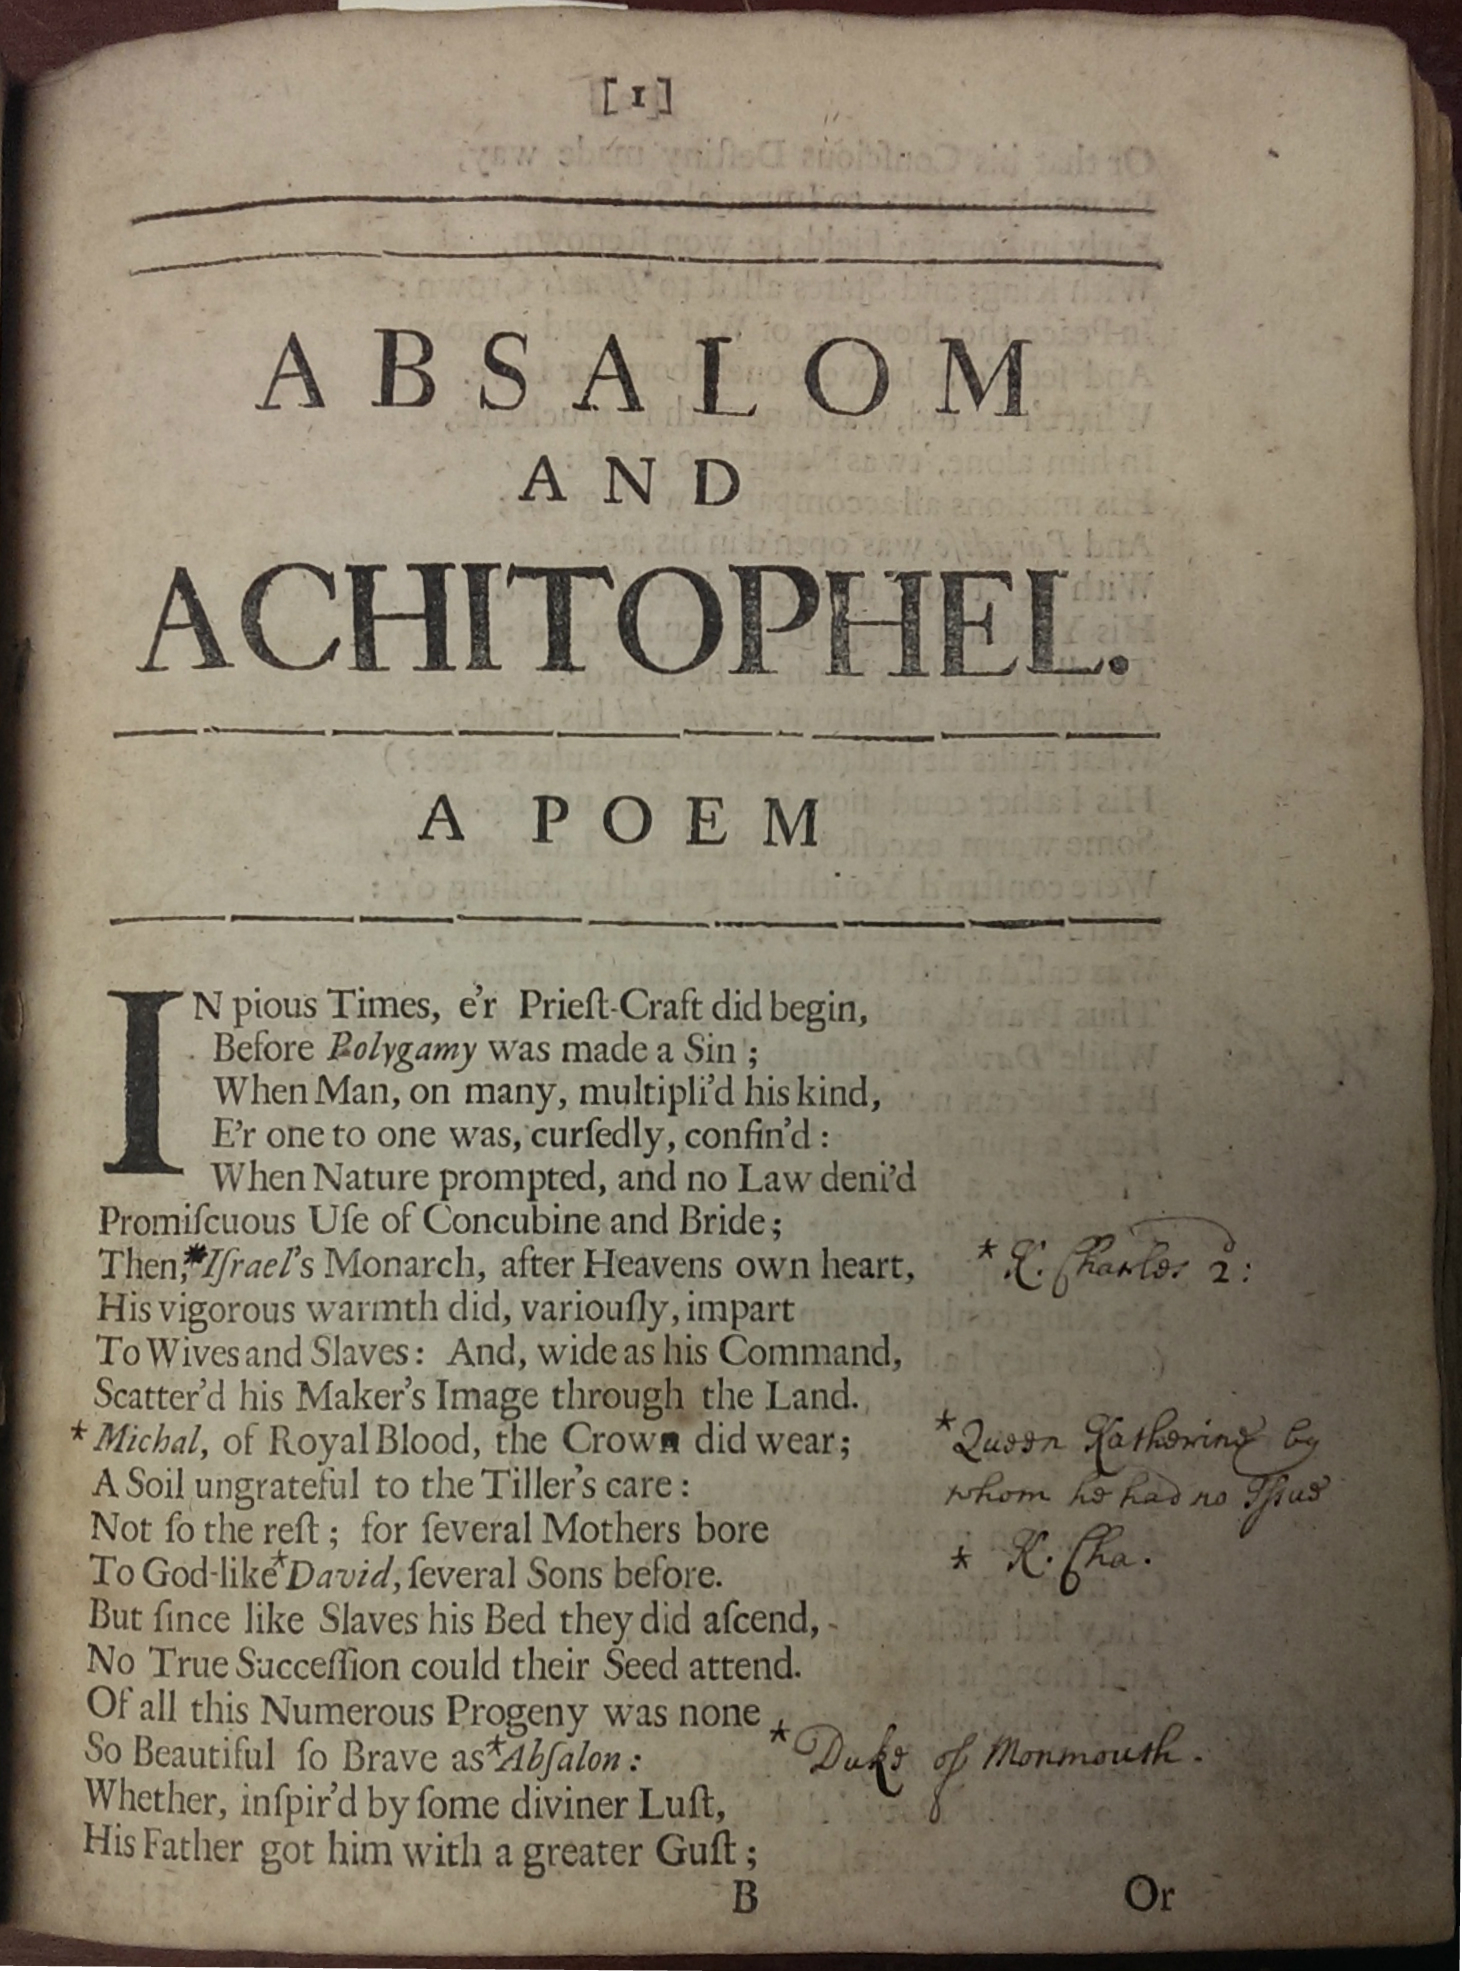 Absalom And Achitophel Adversaria Special Collections